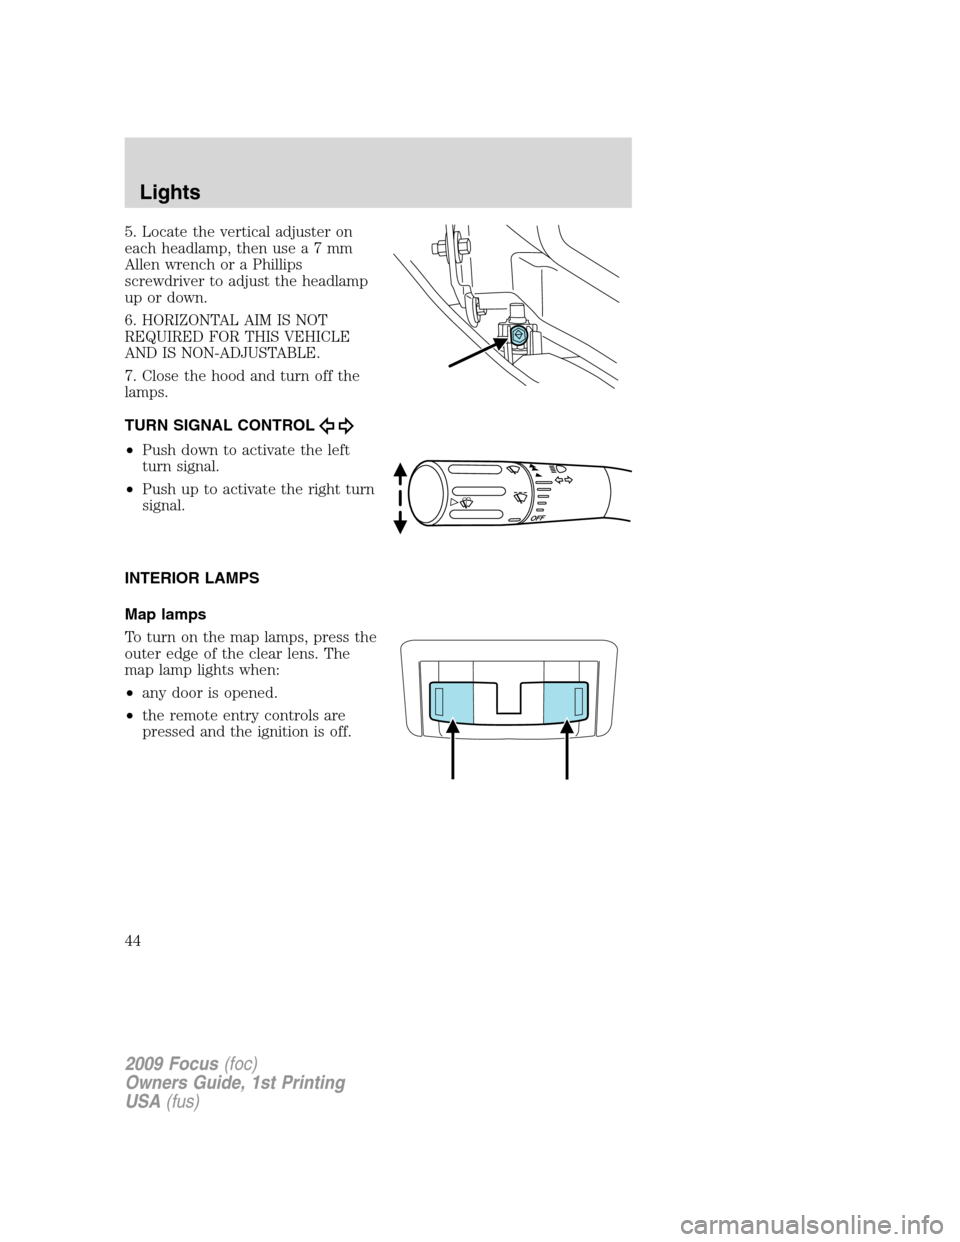 FORD FOCUS 2009 2.G Service Manual 5. Locate the vertical adjuster on
each headlamp, then usea7mm
Allen wrench or a Phillips
screwdriver to adjust the headlamp
up or down.
6. HORIZONTAL AIM IS NOT
REQUIRED FOR THIS VEHICLE
AND IS NON-A